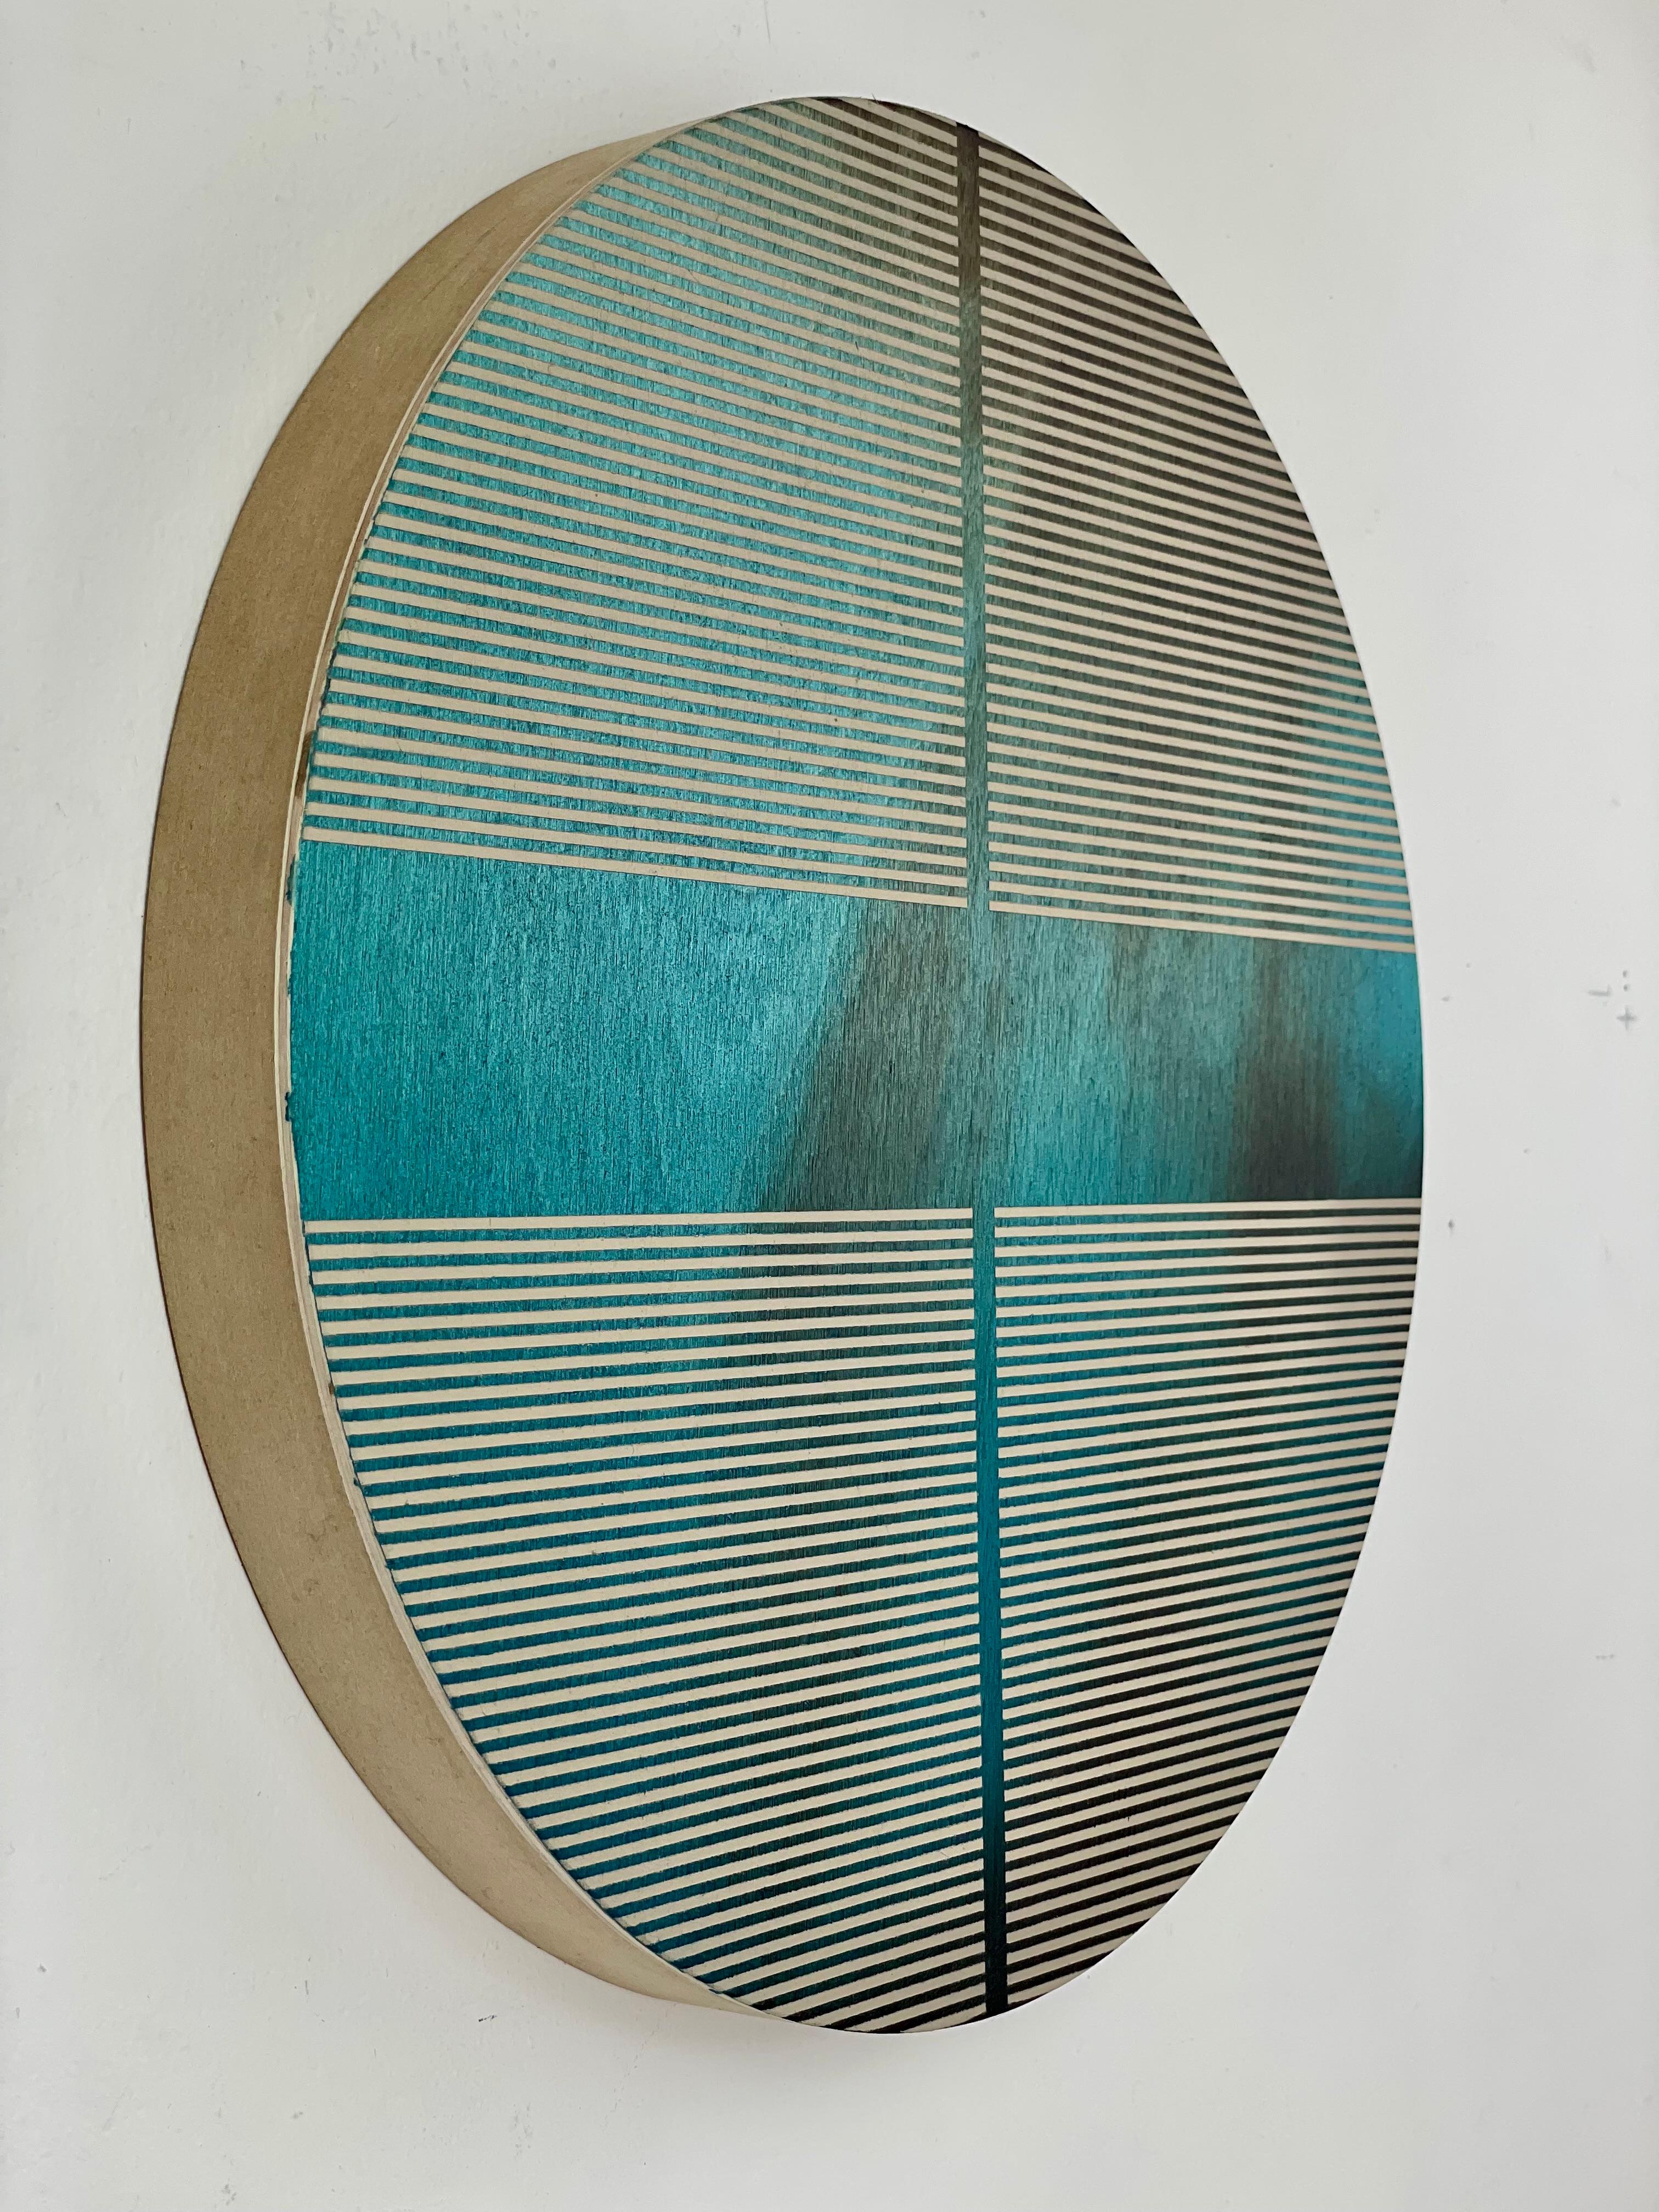 Aqua blue pill (minimaliste grid round painting on wood dopamine color vibrant) - Painting by Melisa Taylor Metzger